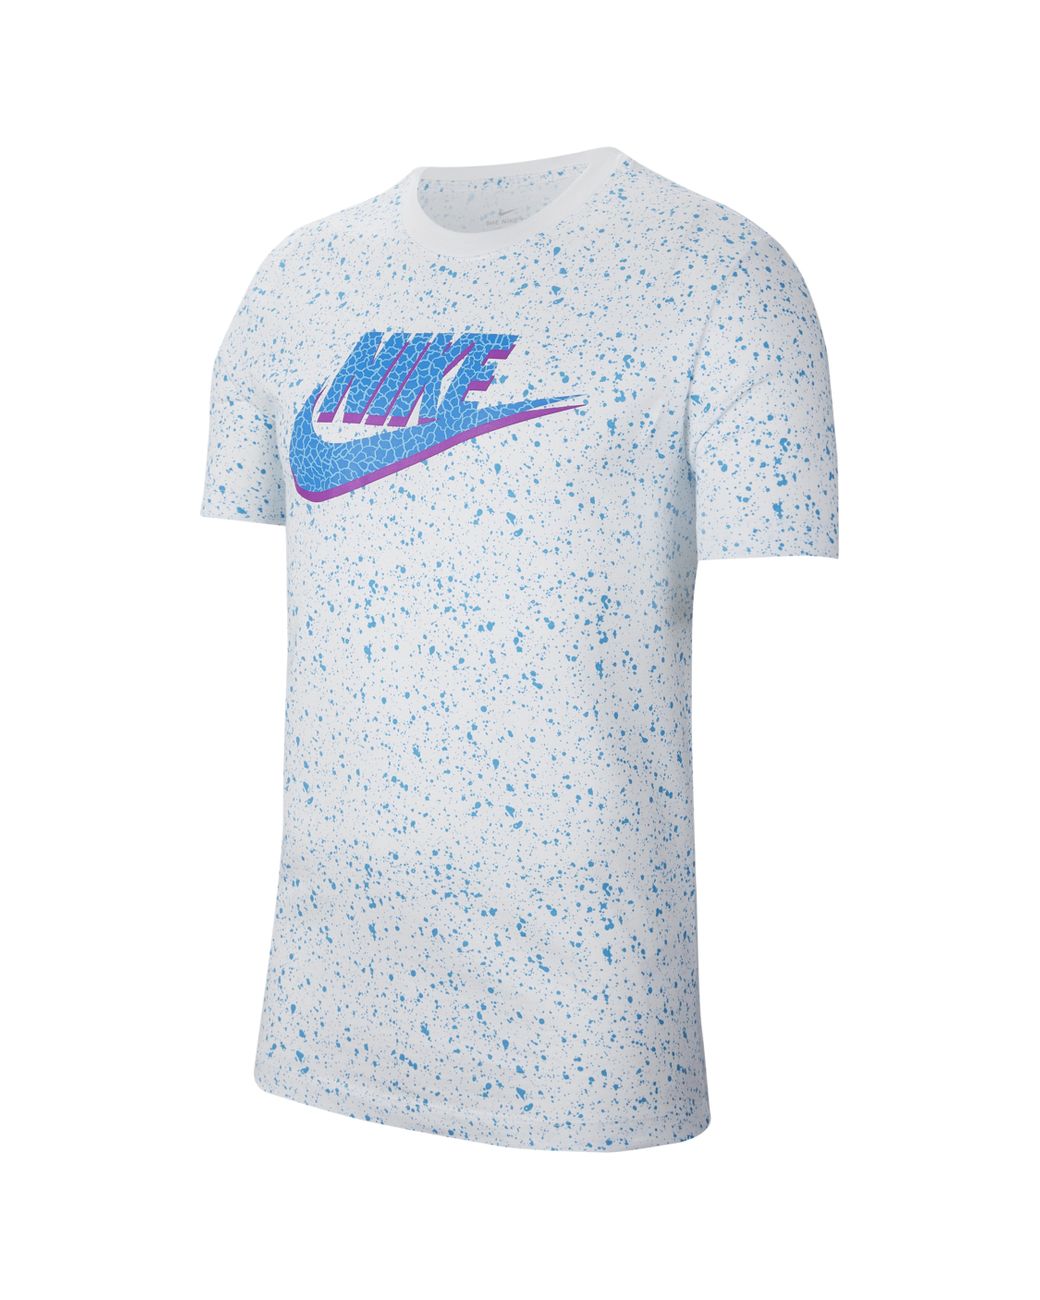 Nike Cotton Swoosh All Over Print T-shirt in White for Men - Lyst